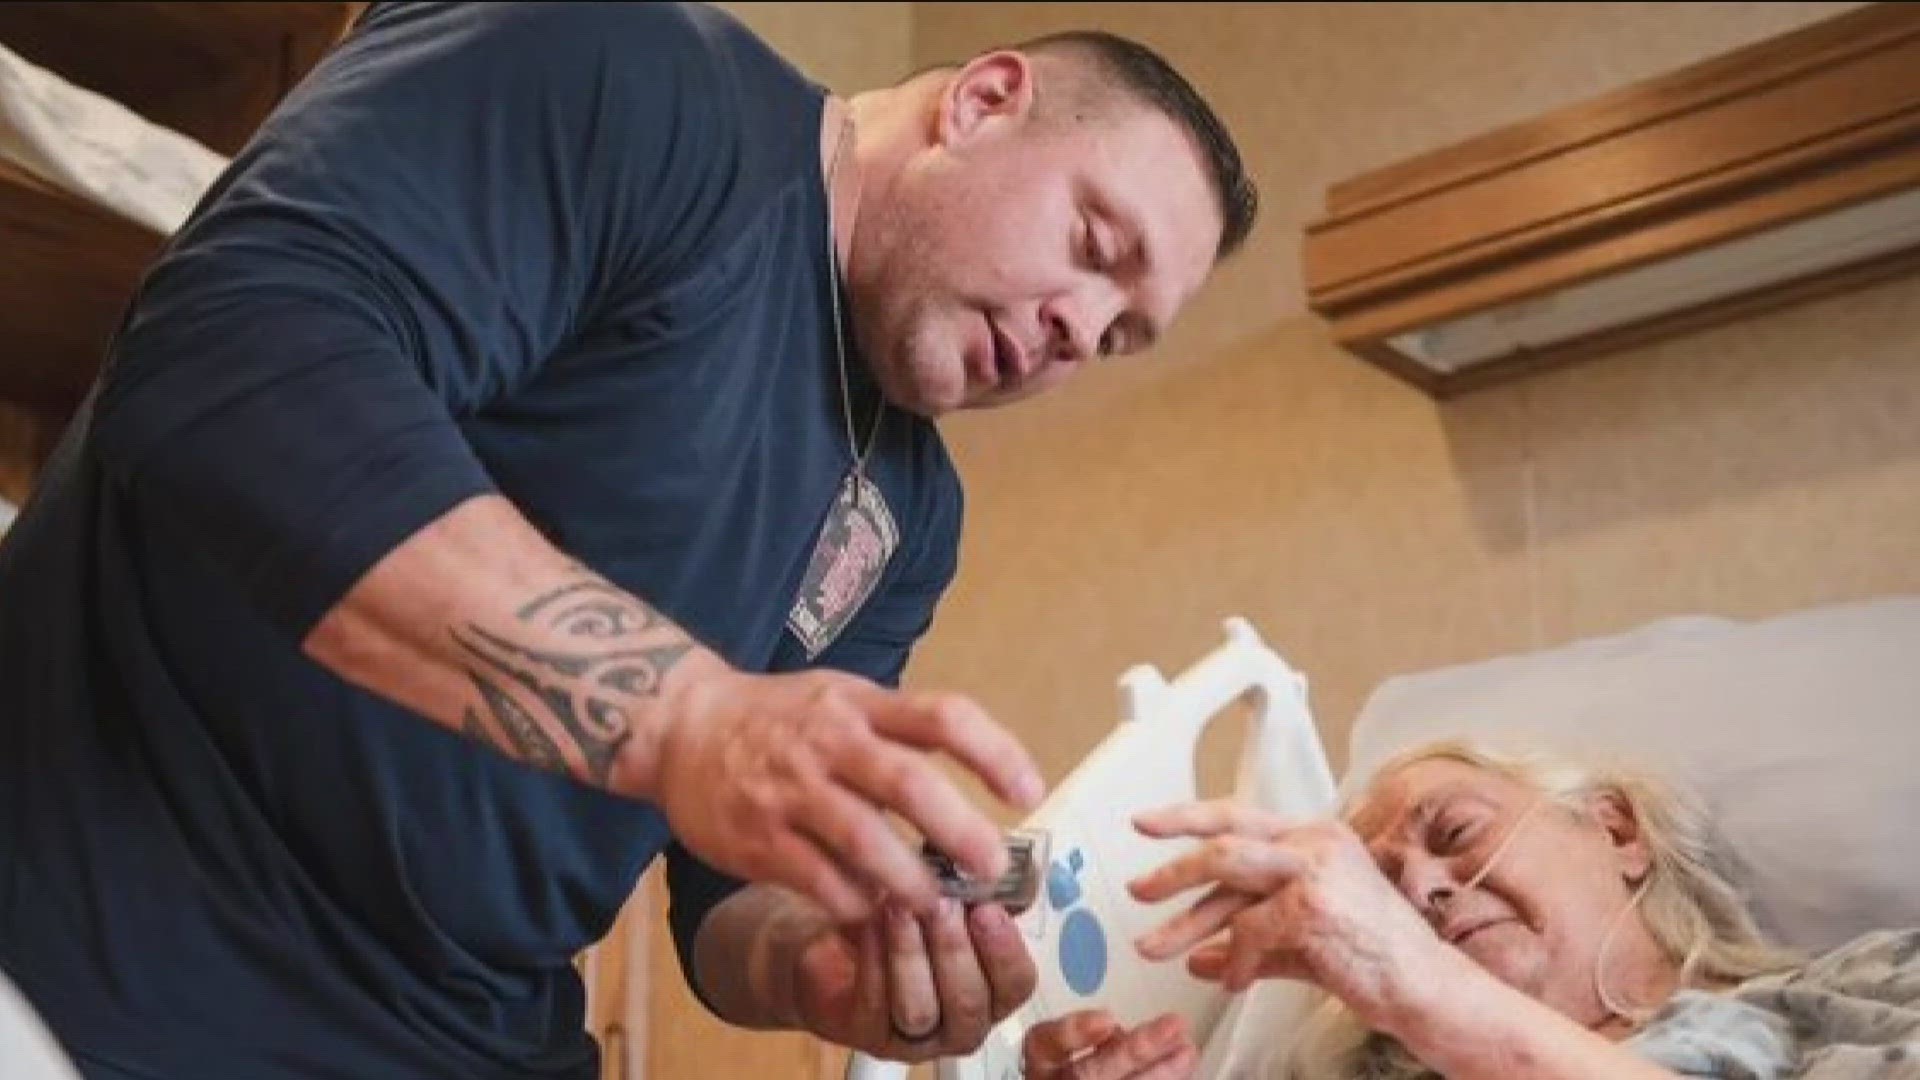 Marcus Waugh from TFRD went back to a nursing home to visit a woman after she recognized him as the World's Strongest Firefighter during a lift assist last month.